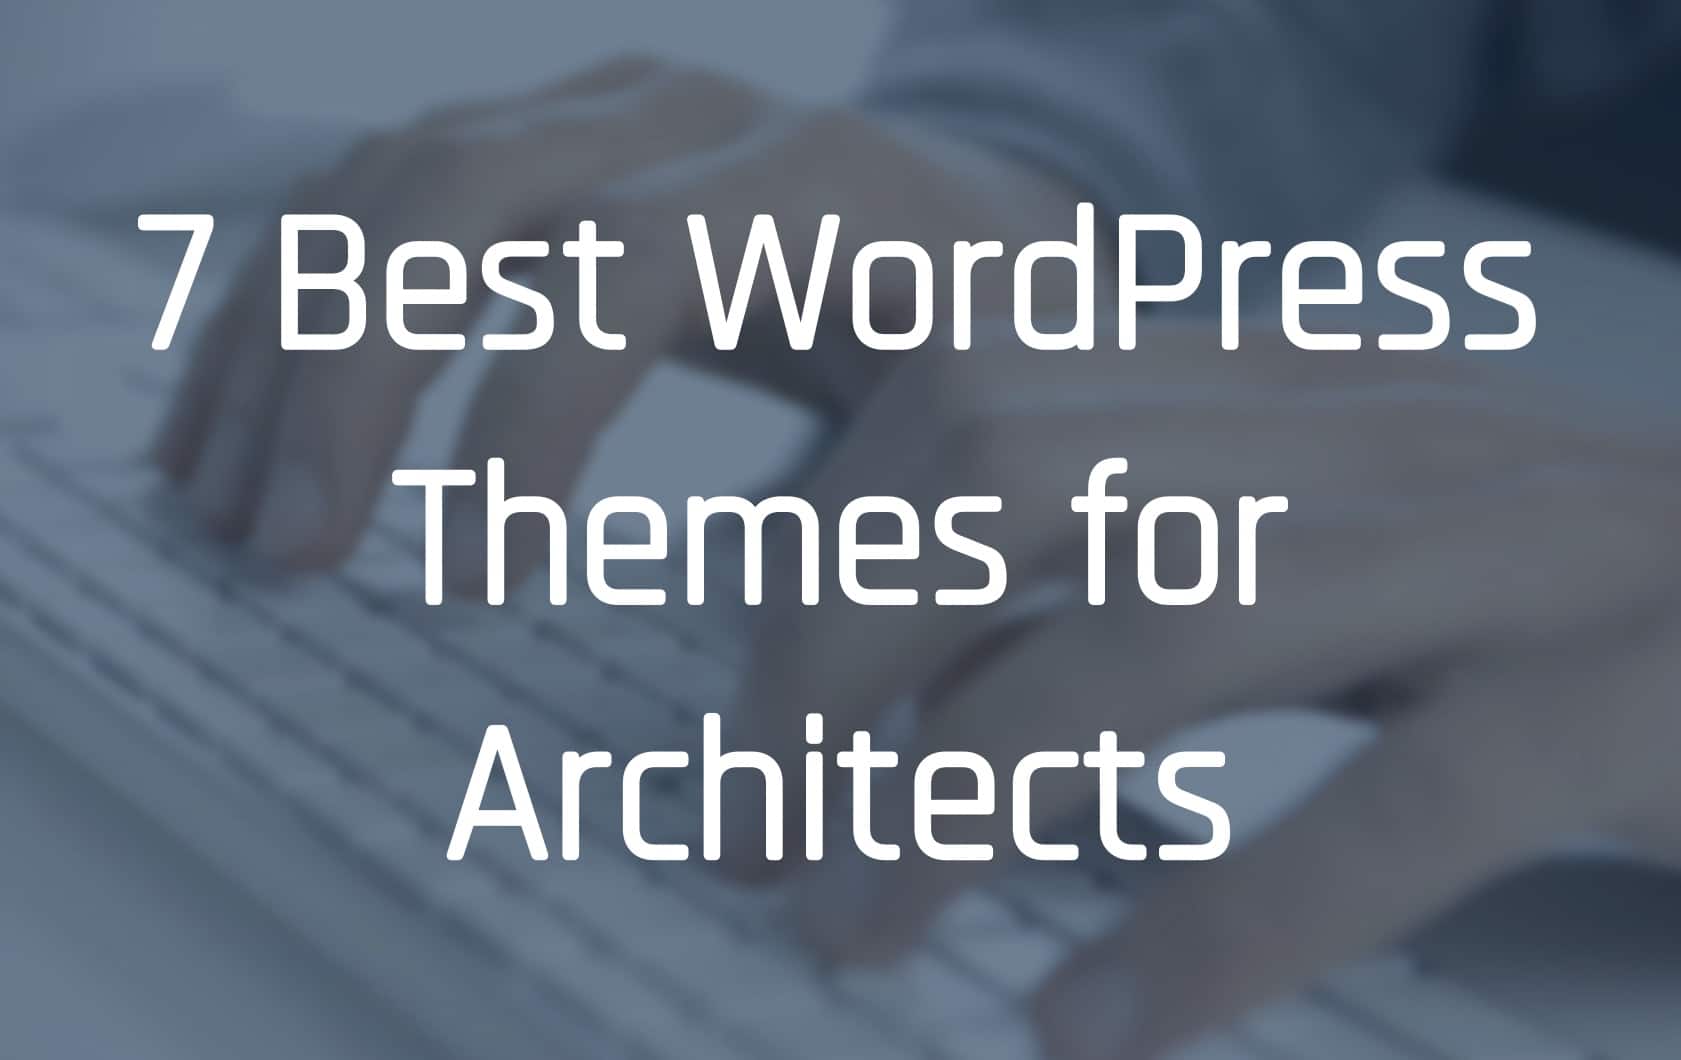 This image is showcasing seven of the best WordPress themes for architects to use for their websites.